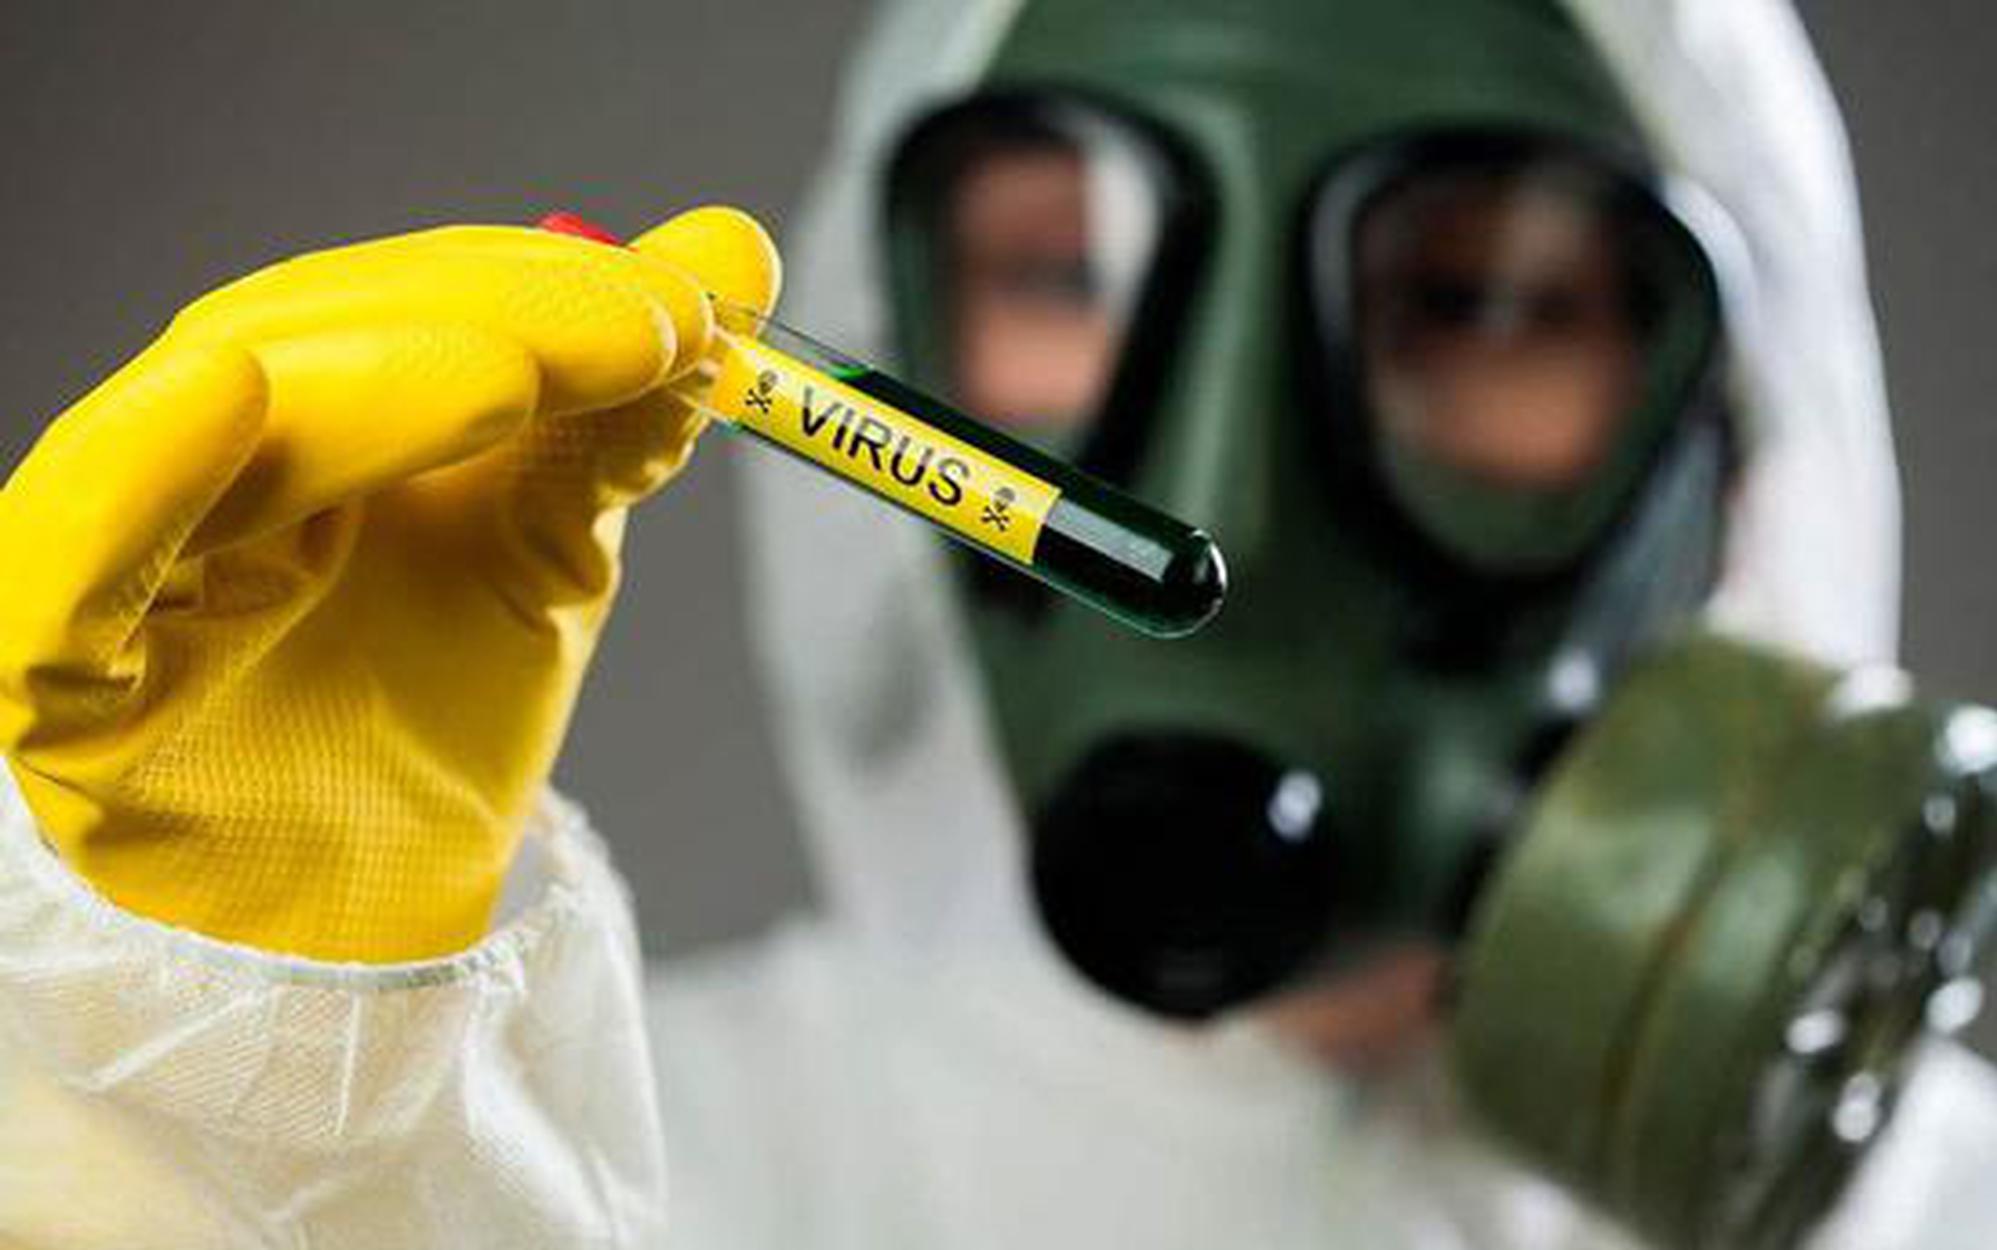 U.S. research into biological weapons just the tip of 'dark history' iceberg